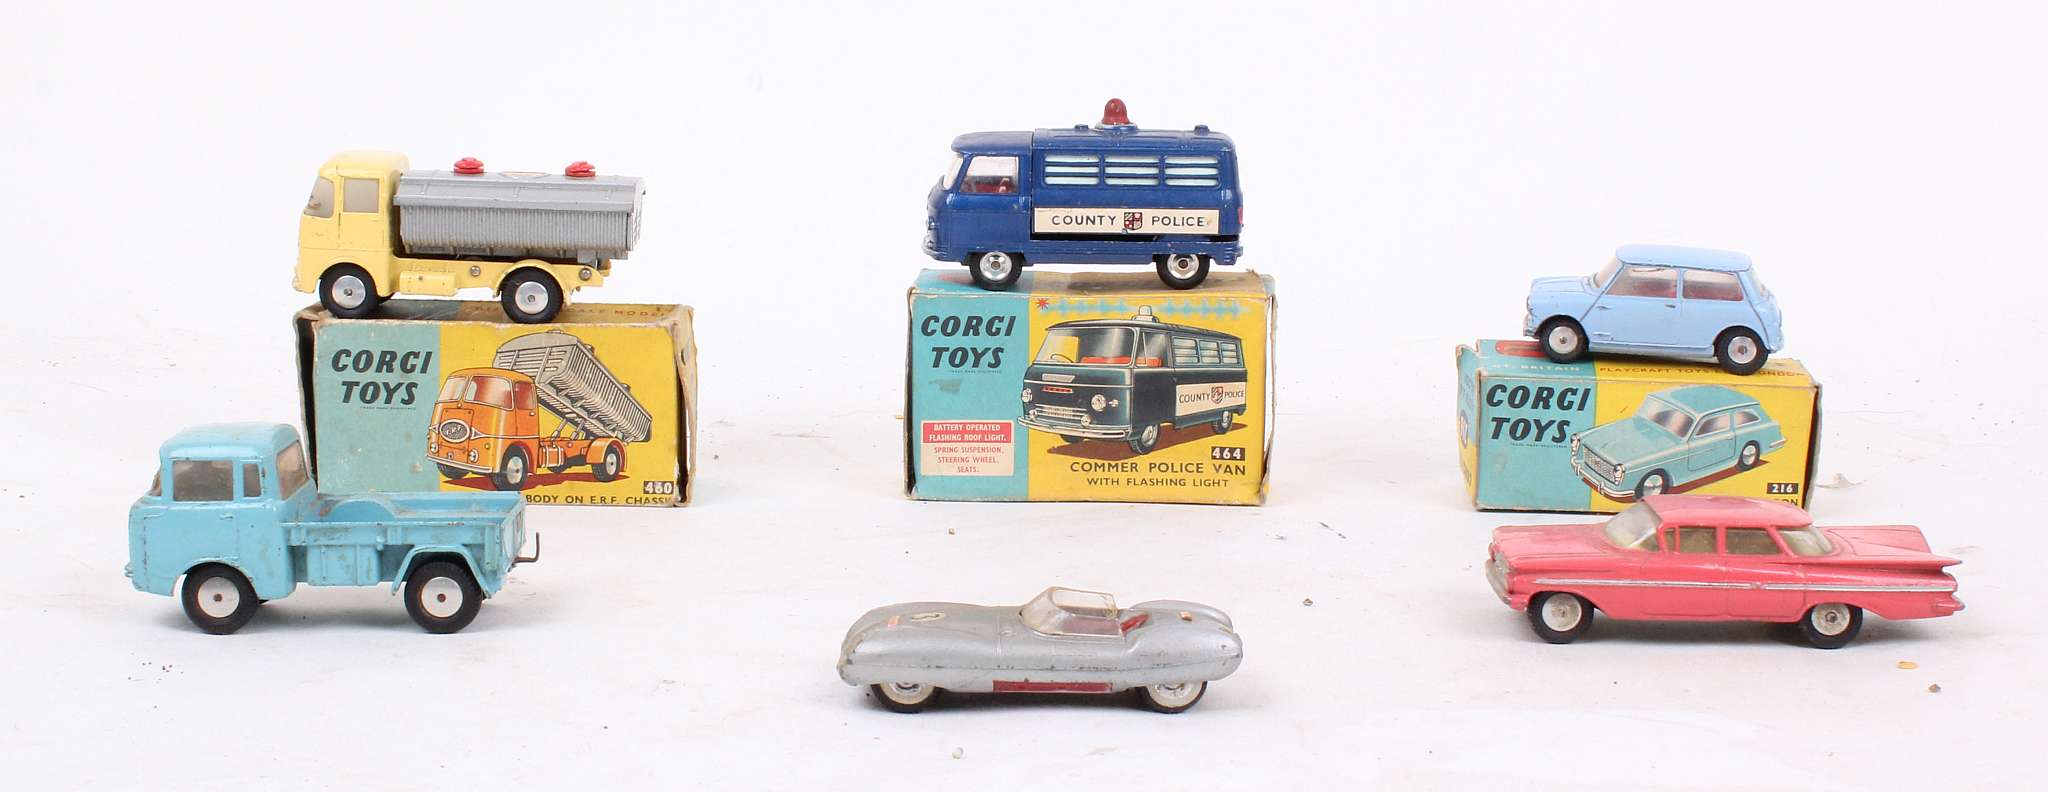 Corgi Toys Vehicles, including Commer Police Van 464 blue with red light, boxed, Neville Cement